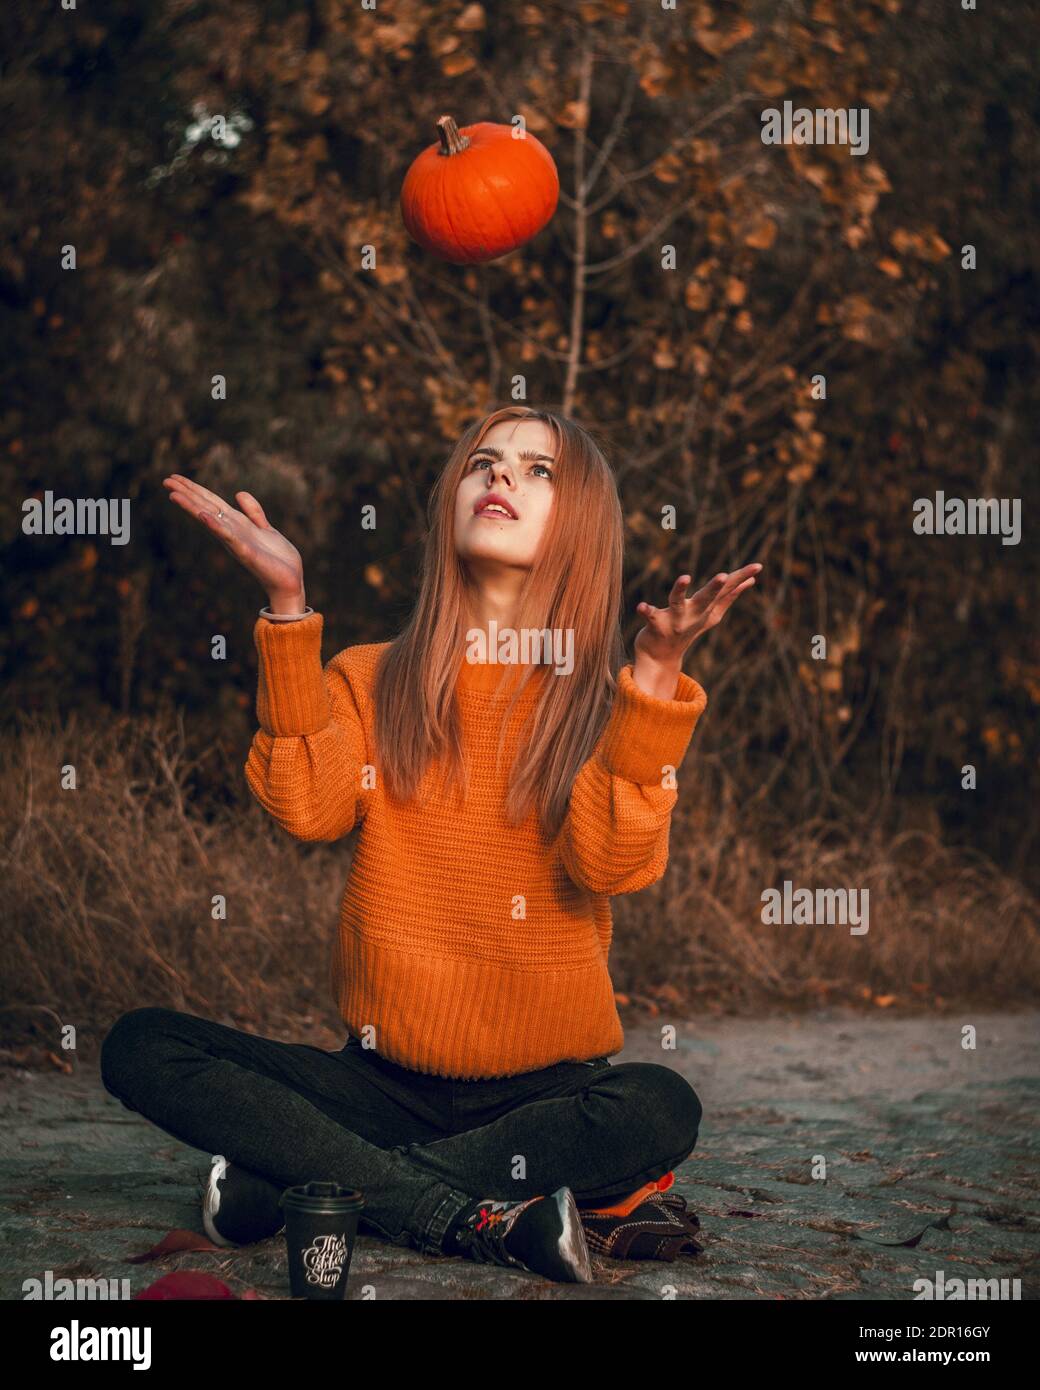 Full Length Of Young Woman Holding Pumpkin Sitting Against Trees Stock Photo